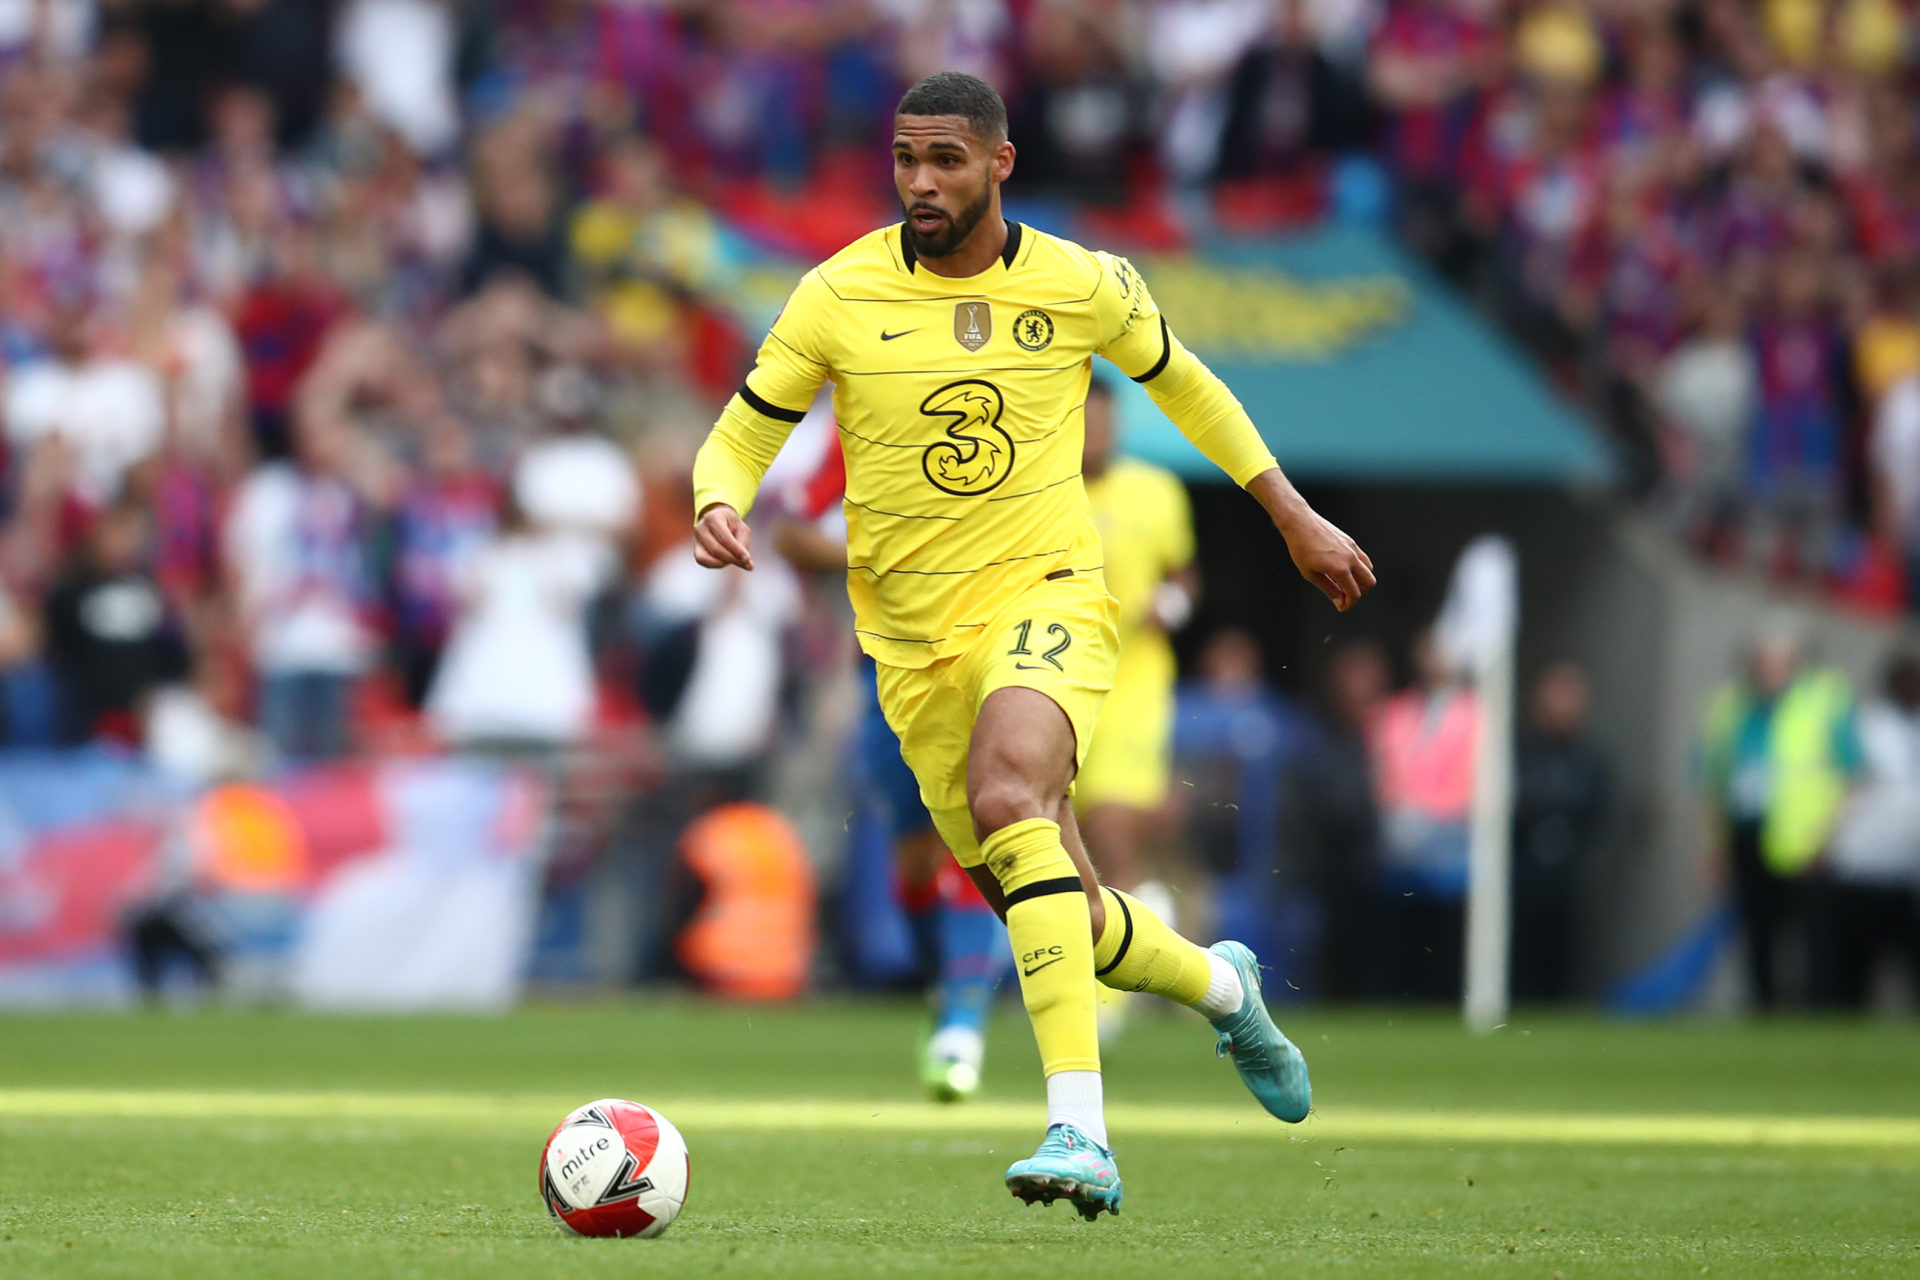 West Ham United reportedly want to sign Chelsea ace Ruben Loftus-Cheek in the summer